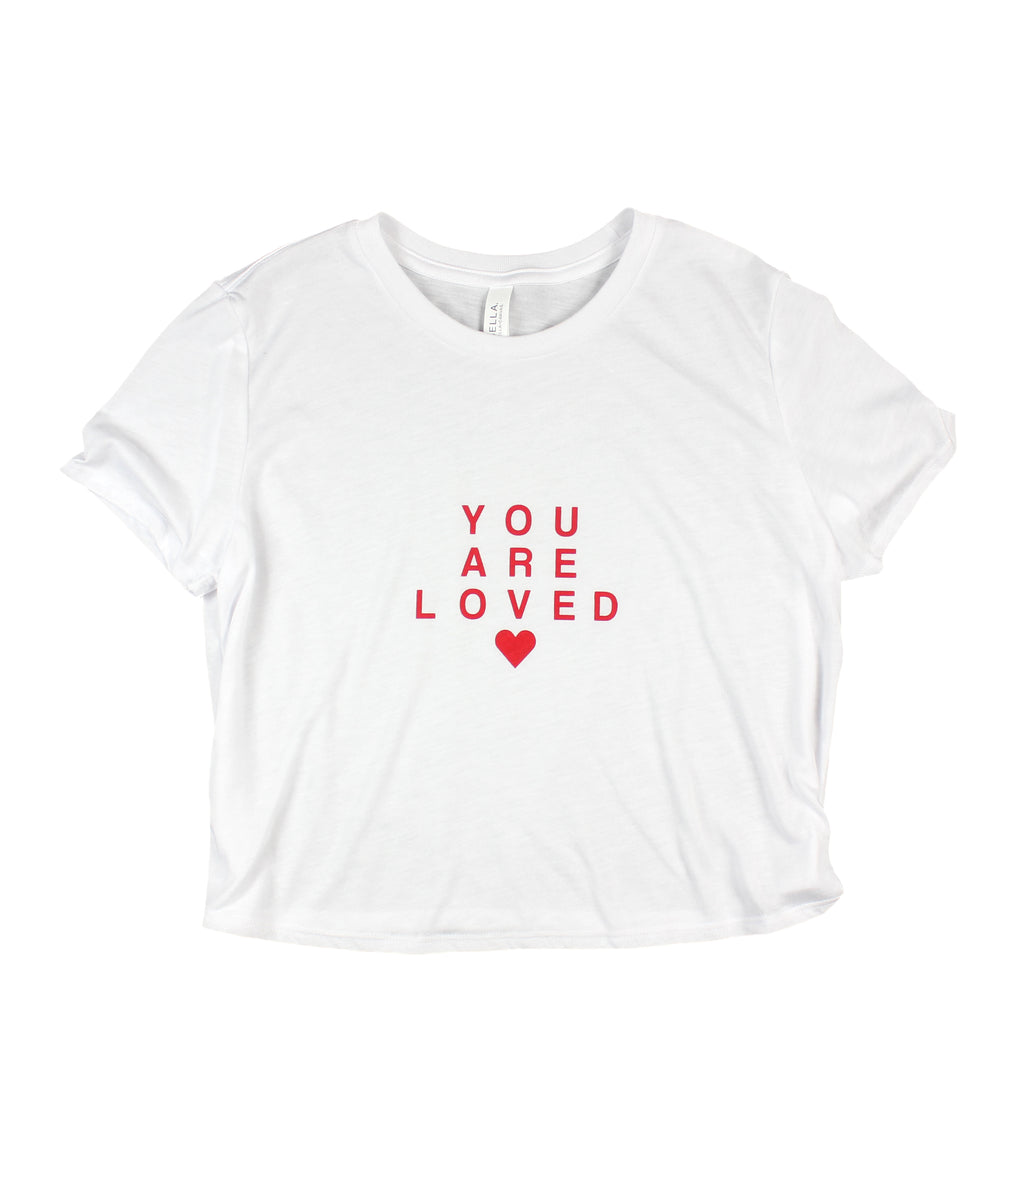 YOU ARE LOVED RED LETTER WHITE WOMEN'S FLOWY CROPPED TEE